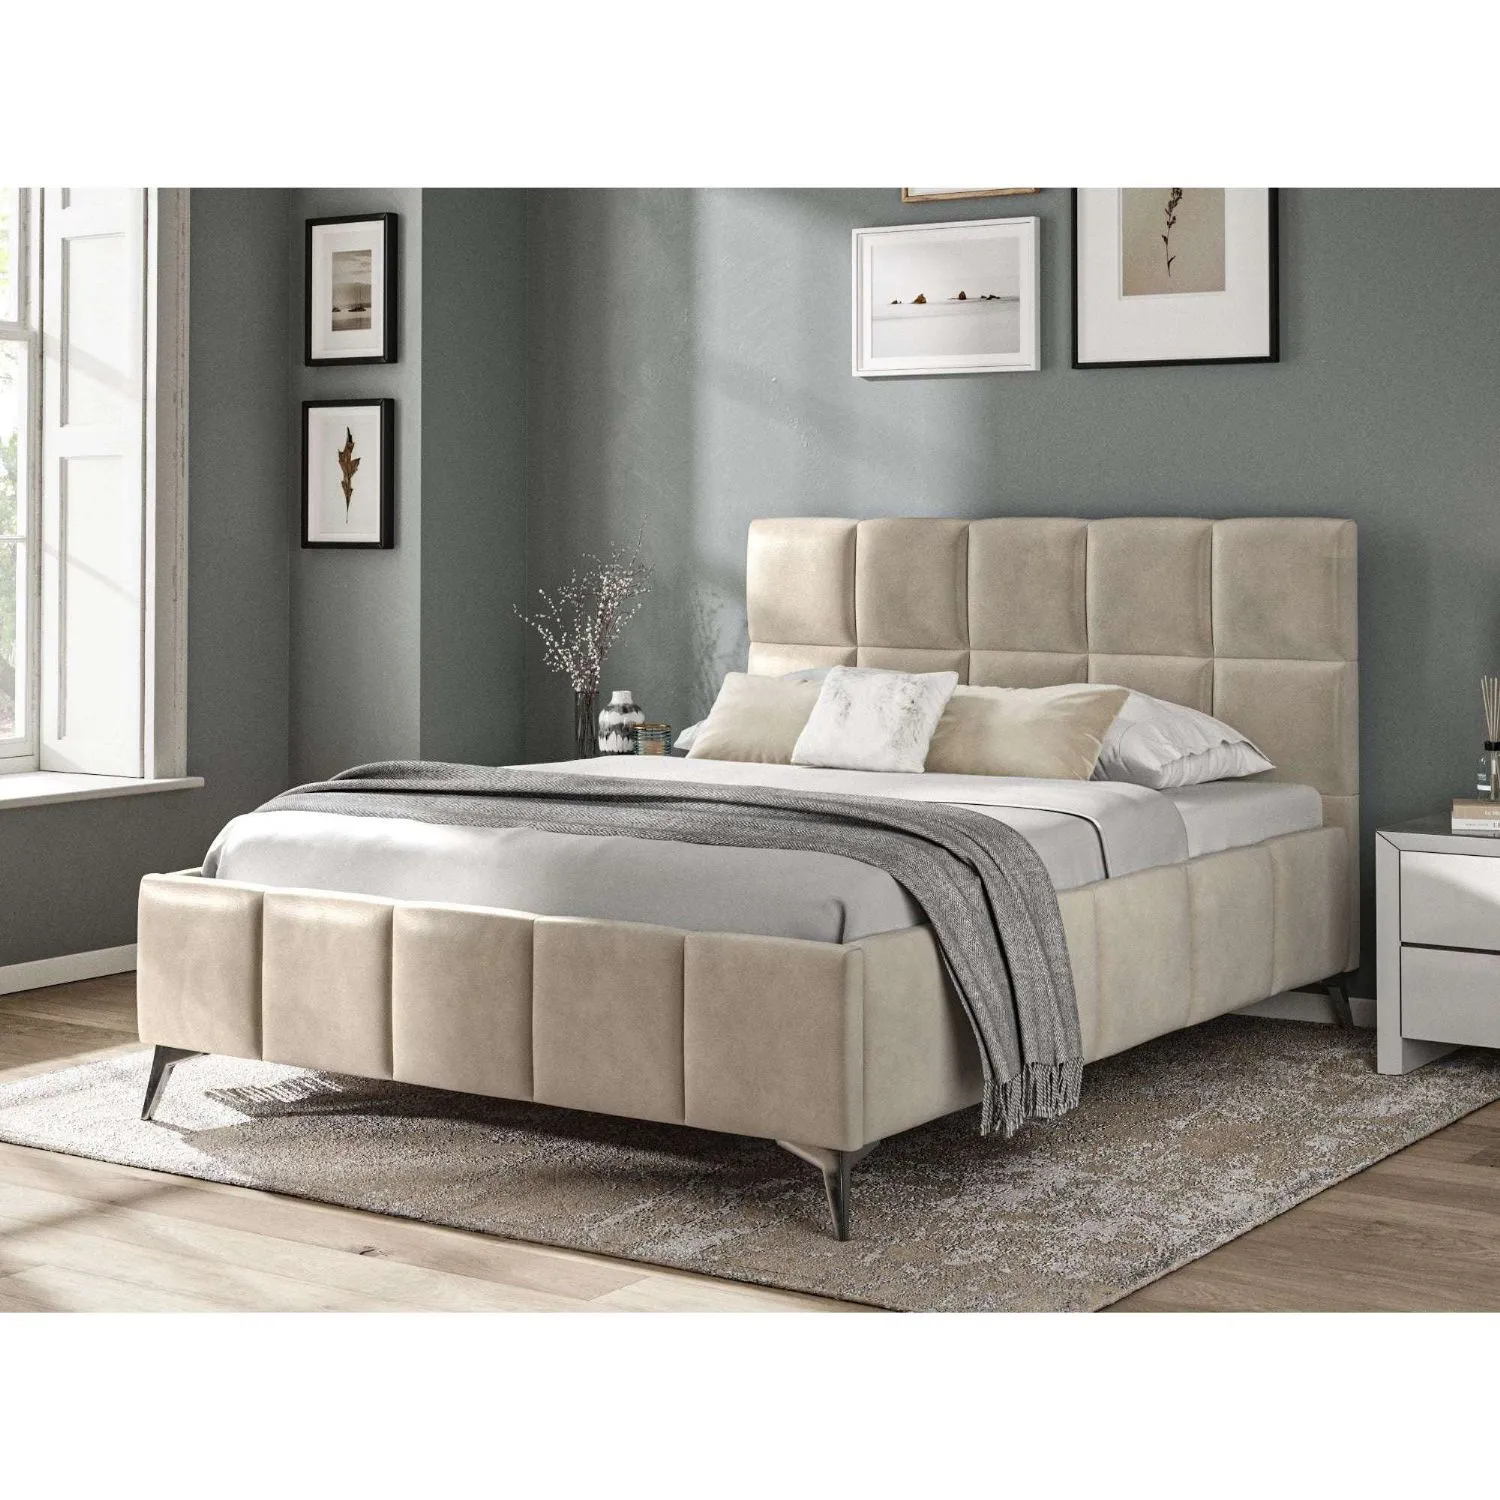 Fabric Bed Collection Beige 4